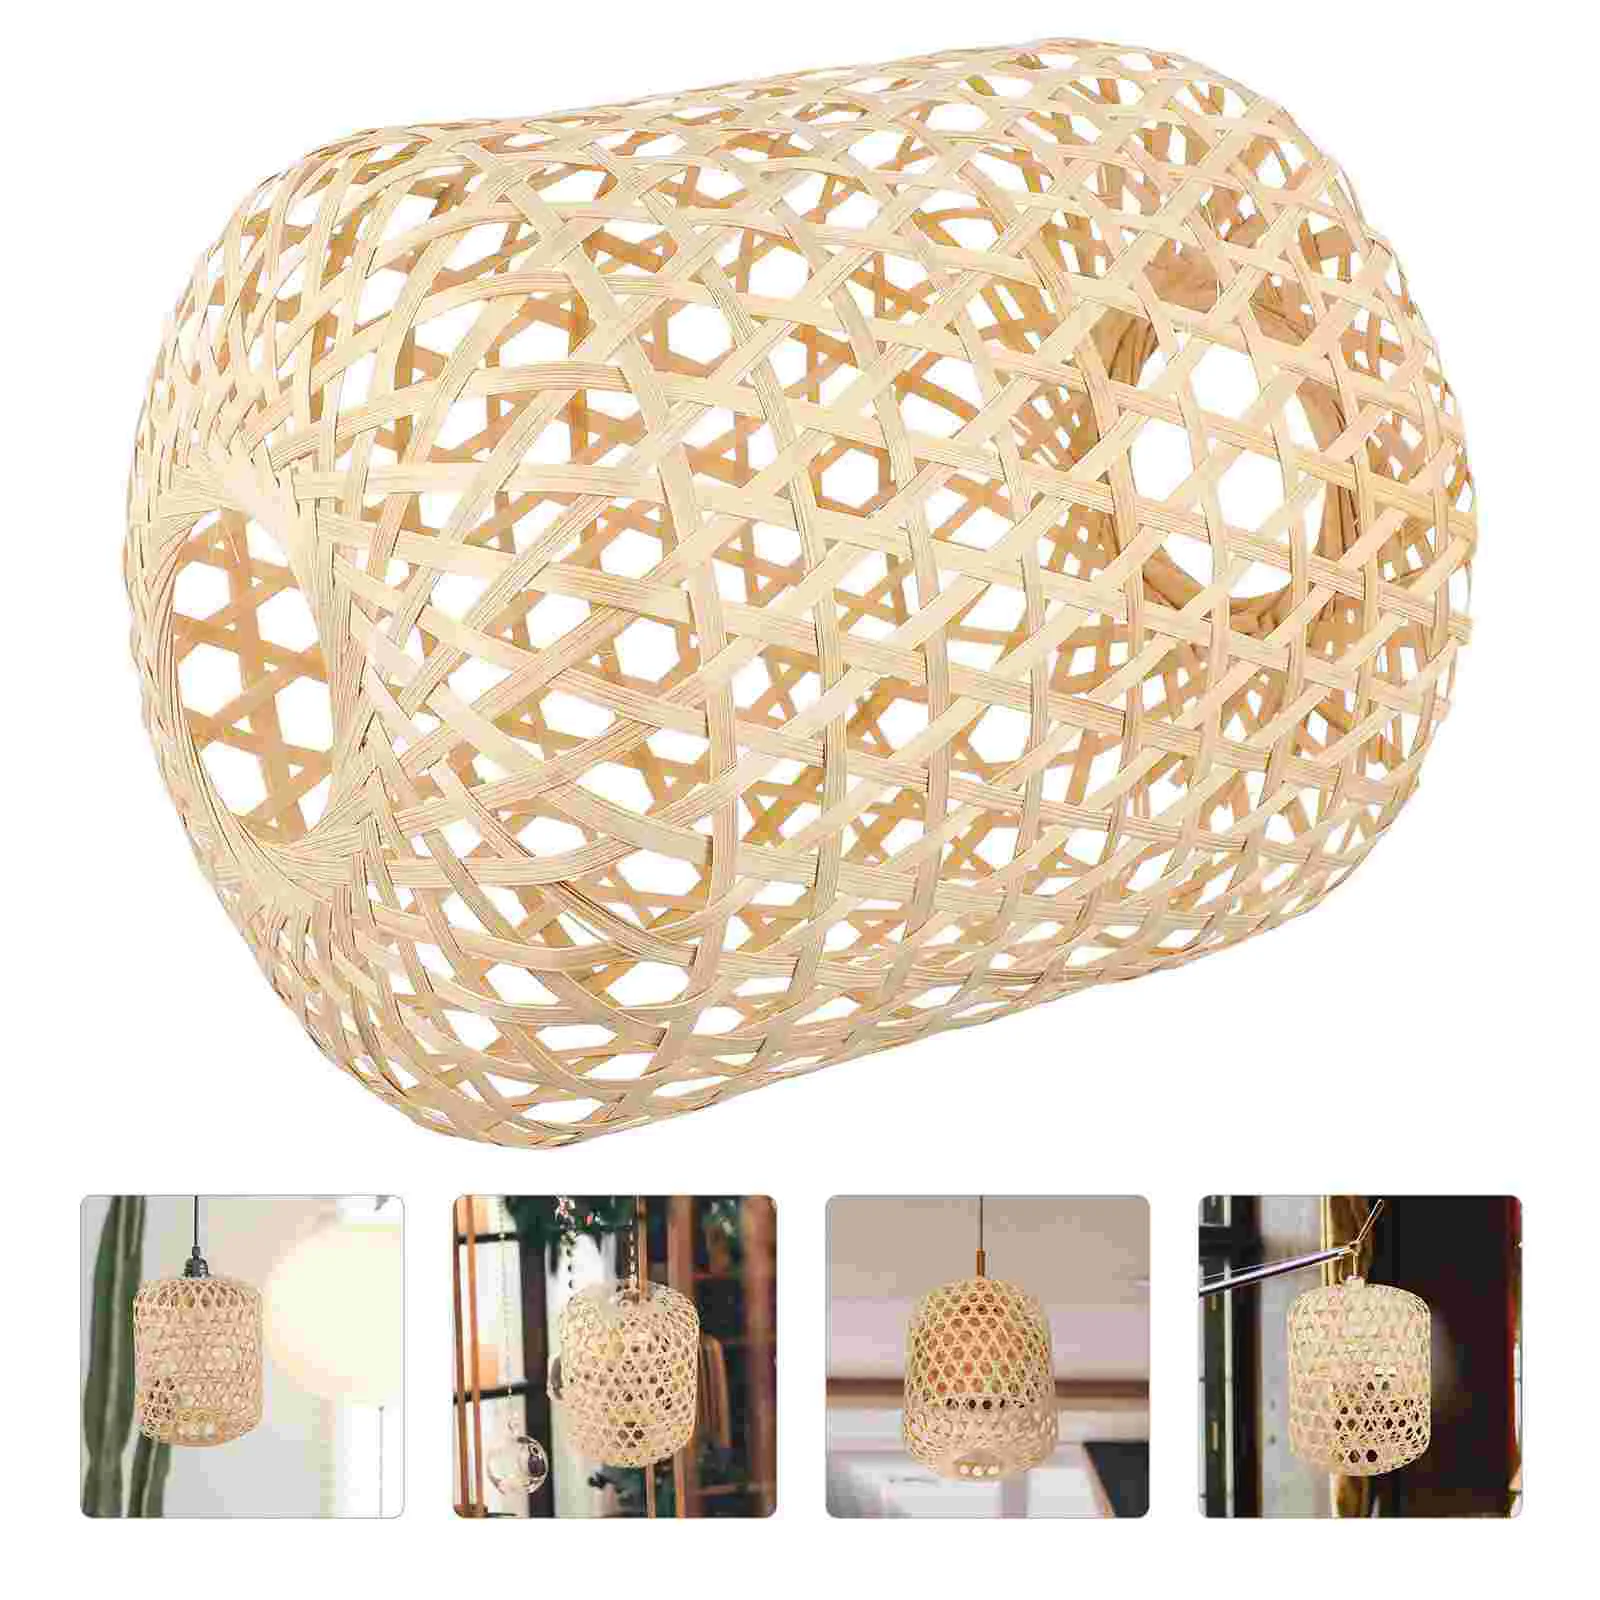 

Lampshade Lamp Shade Pendant Cover Light Chandelier Wicker Ceiling Rattan Floor Farmhouse Table Woven Shades Berrel Decorative